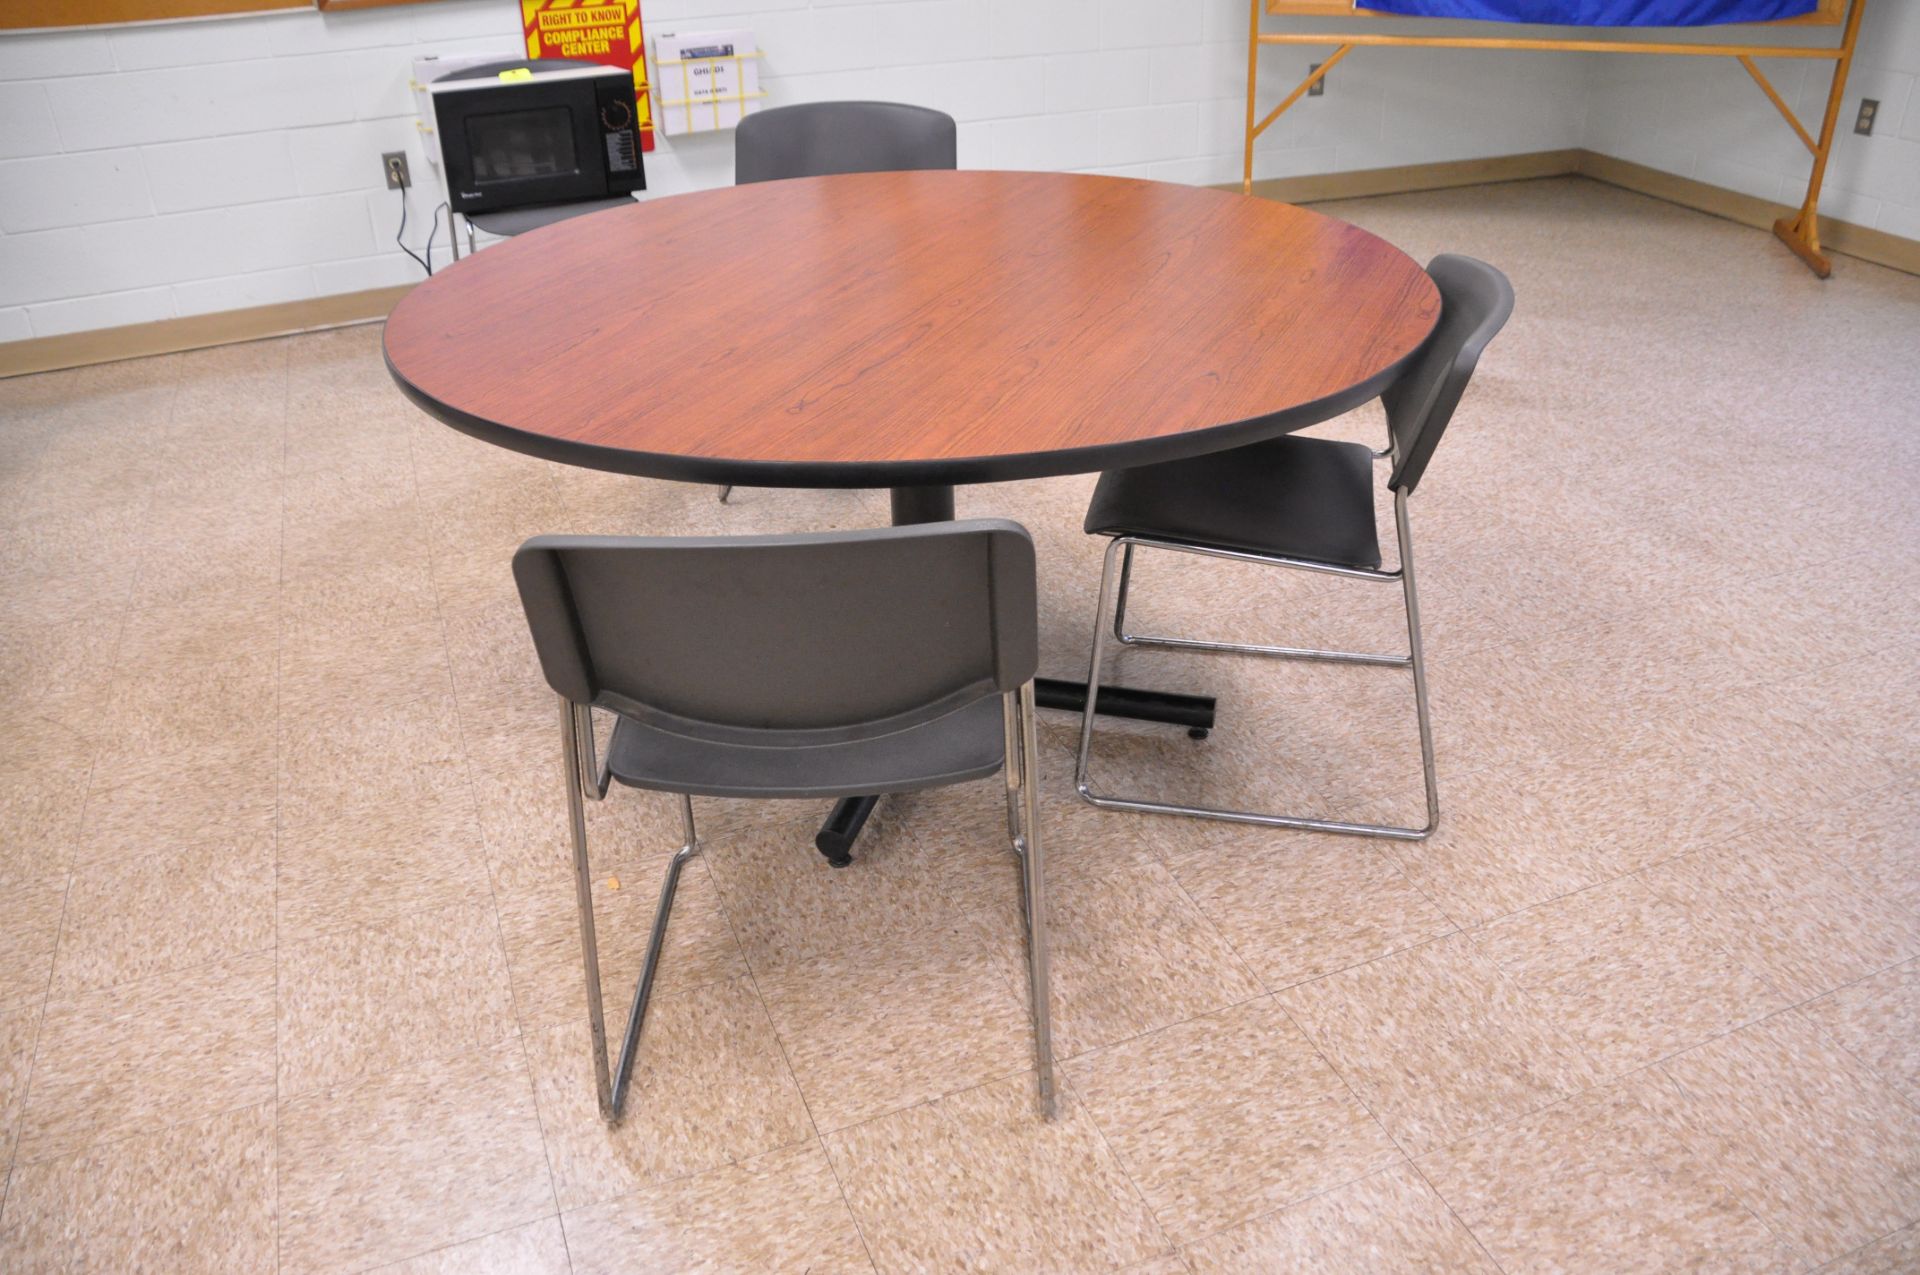 Lot-(7) Tables with Chairs and Lockers (Breakroom) - Image 3 of 6